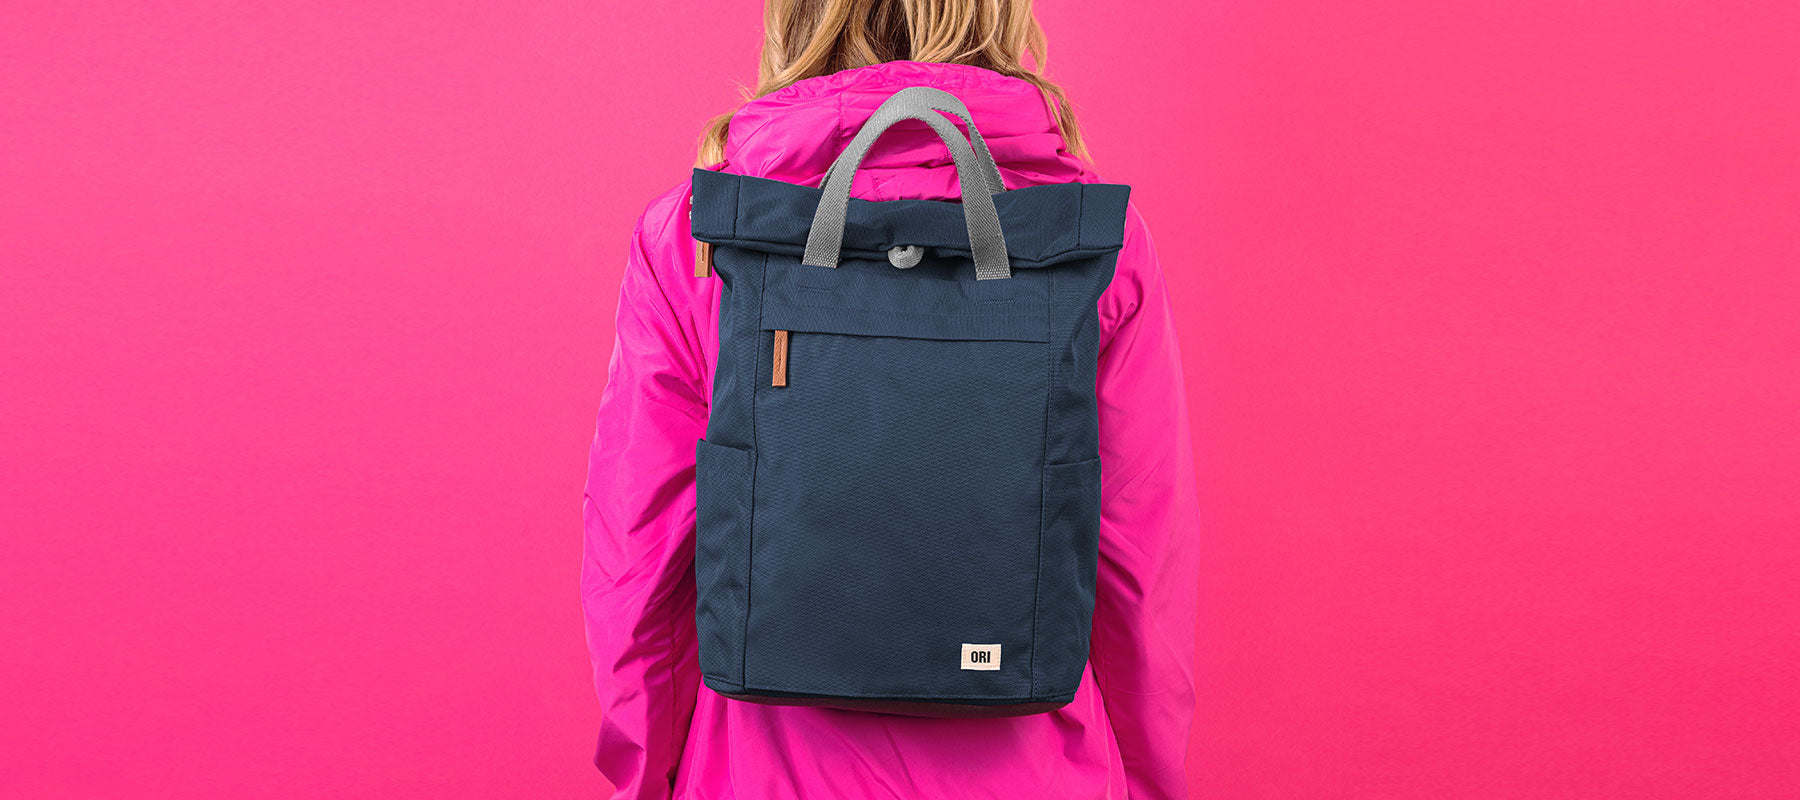 The Finchley Backpack